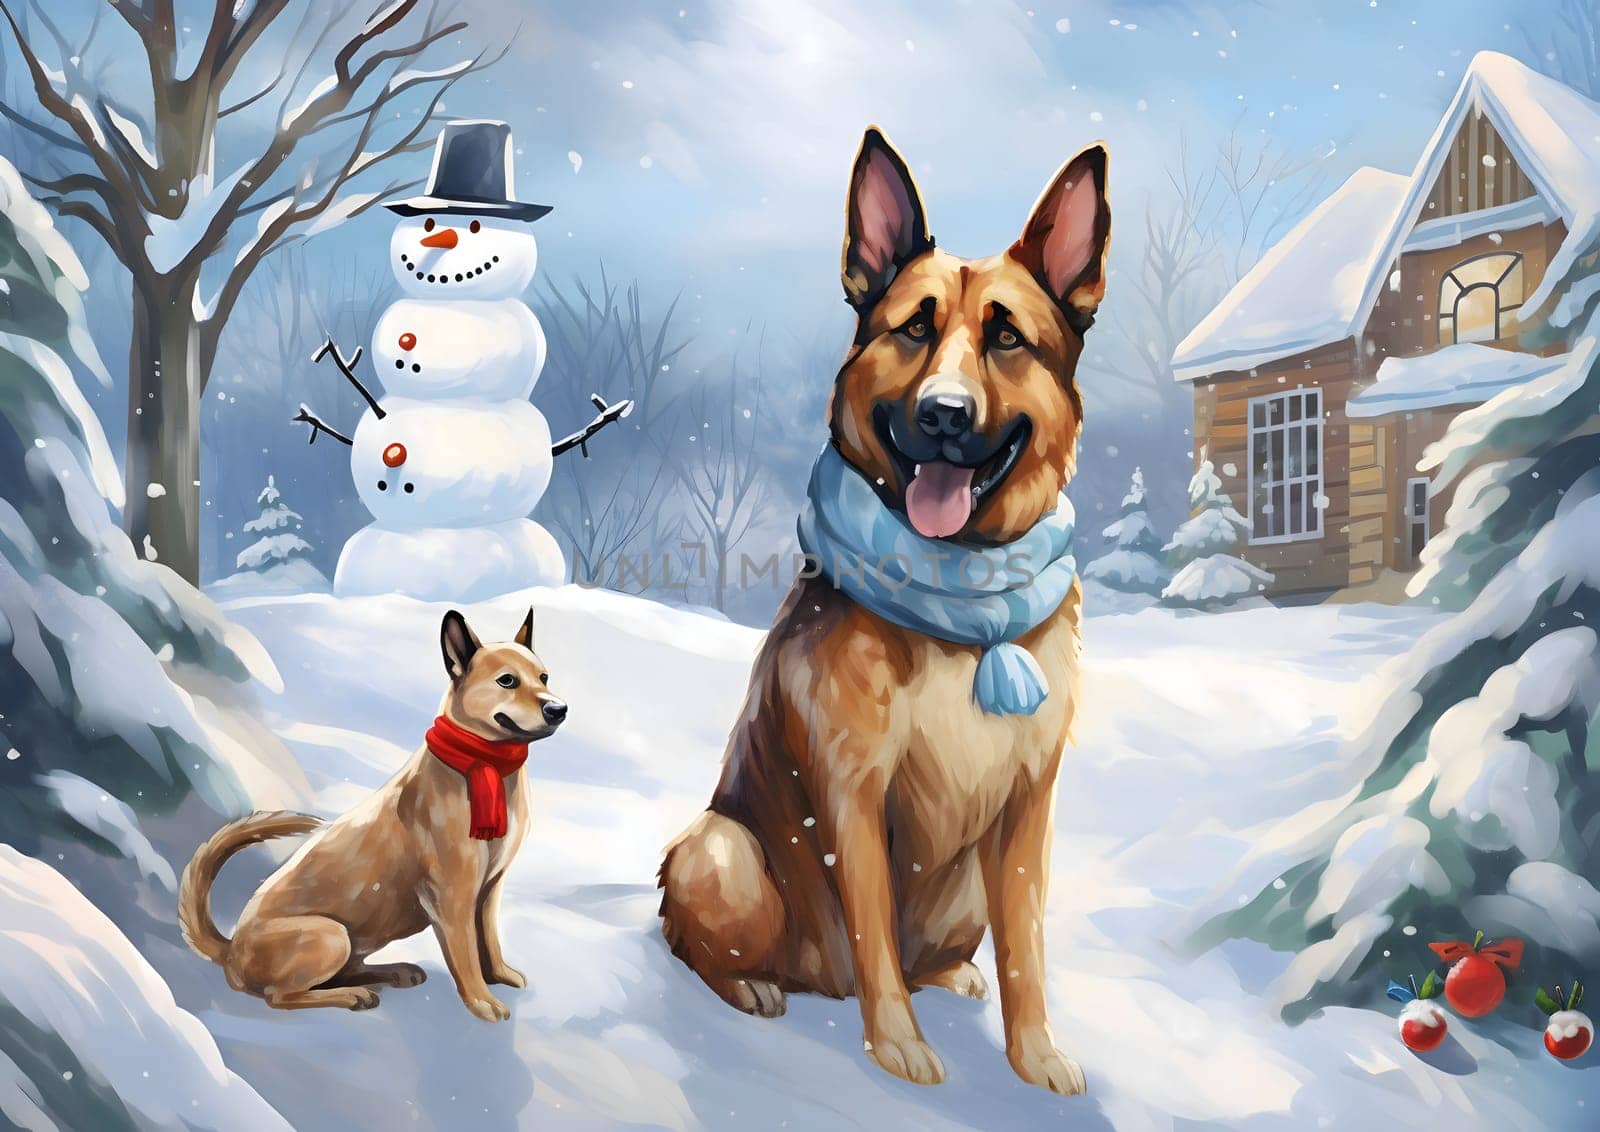 Illustration of two dogs in a Snowy landscape, snowman in the background, Christmas tree house. Christmas card as a symbol of remembrance of the birth of the Savior. A time of joy and celebration.